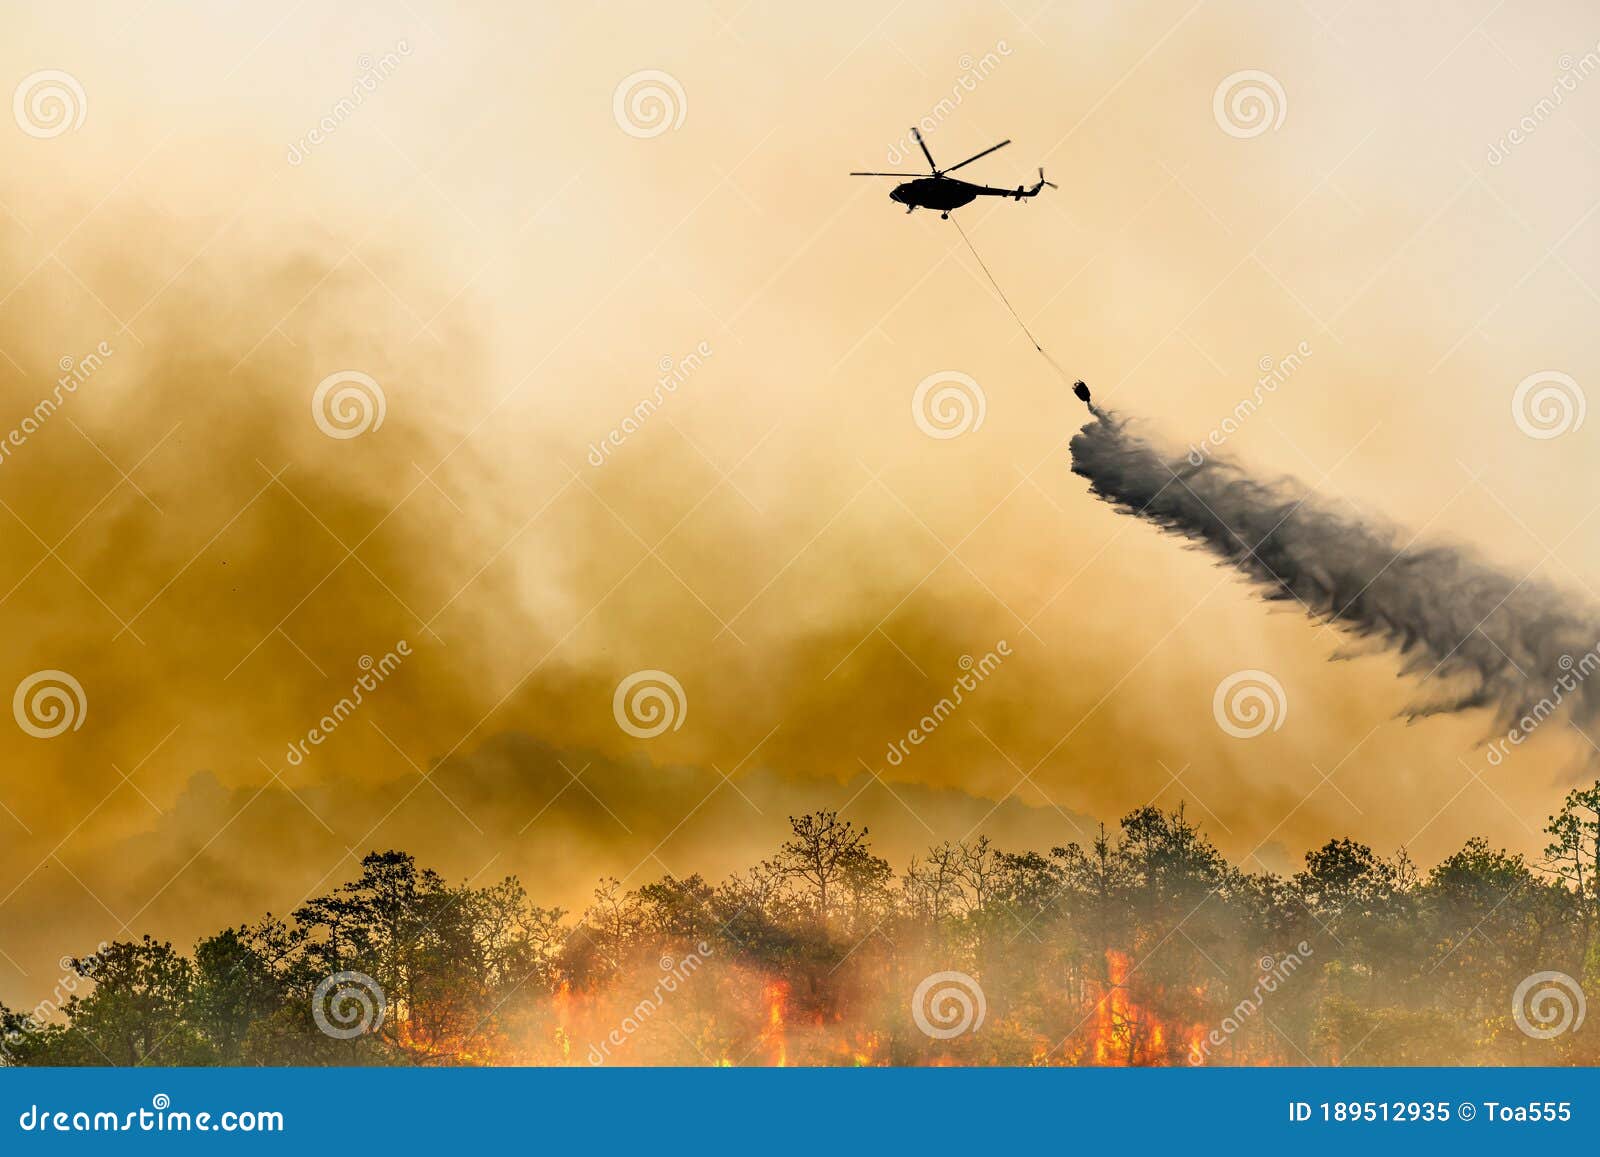 silhouette firefithing helicopter dumps water on forest fire